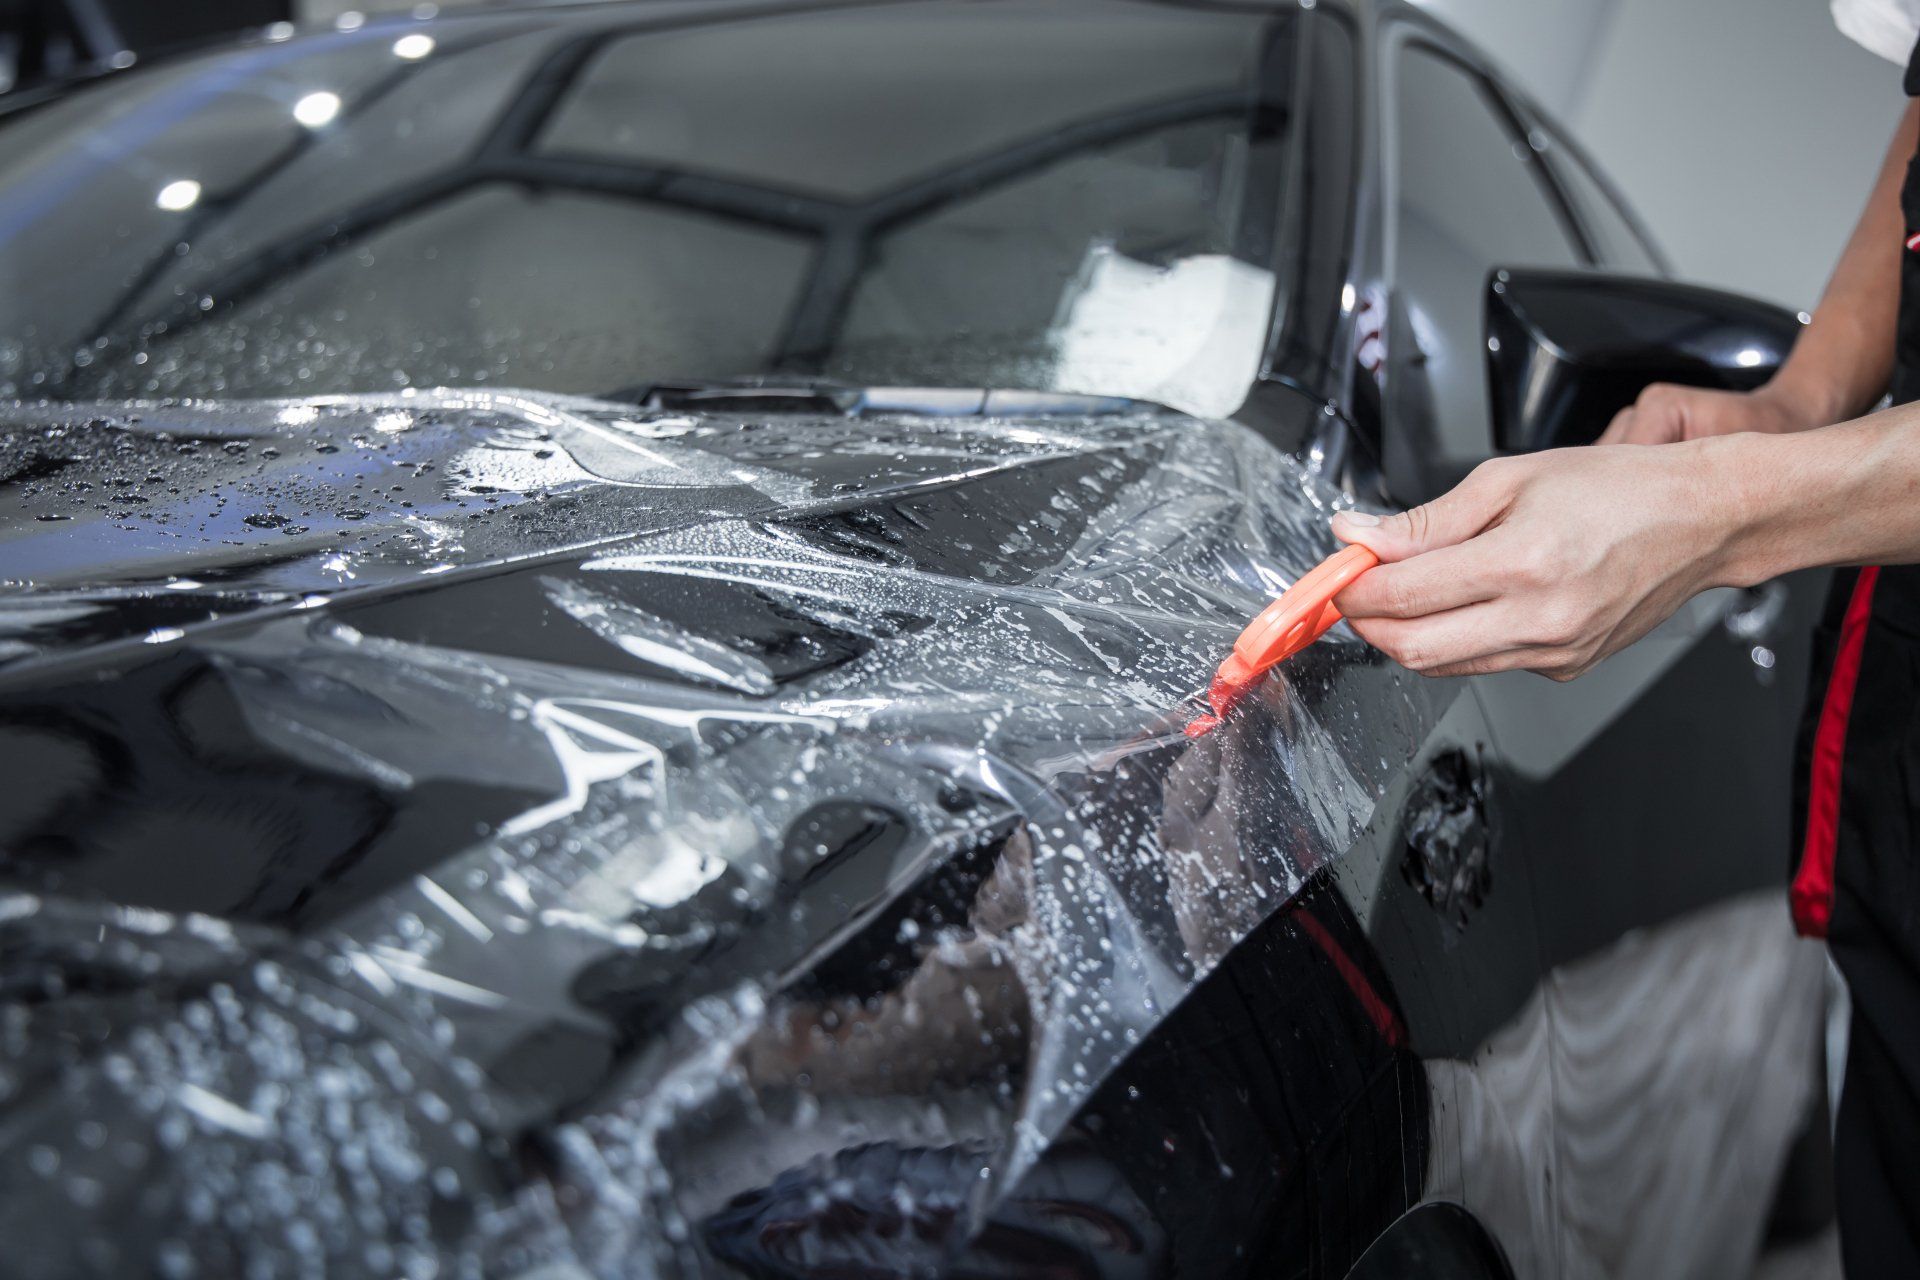 Clear Bra—The Top Vehicle Paint Protector on the Market